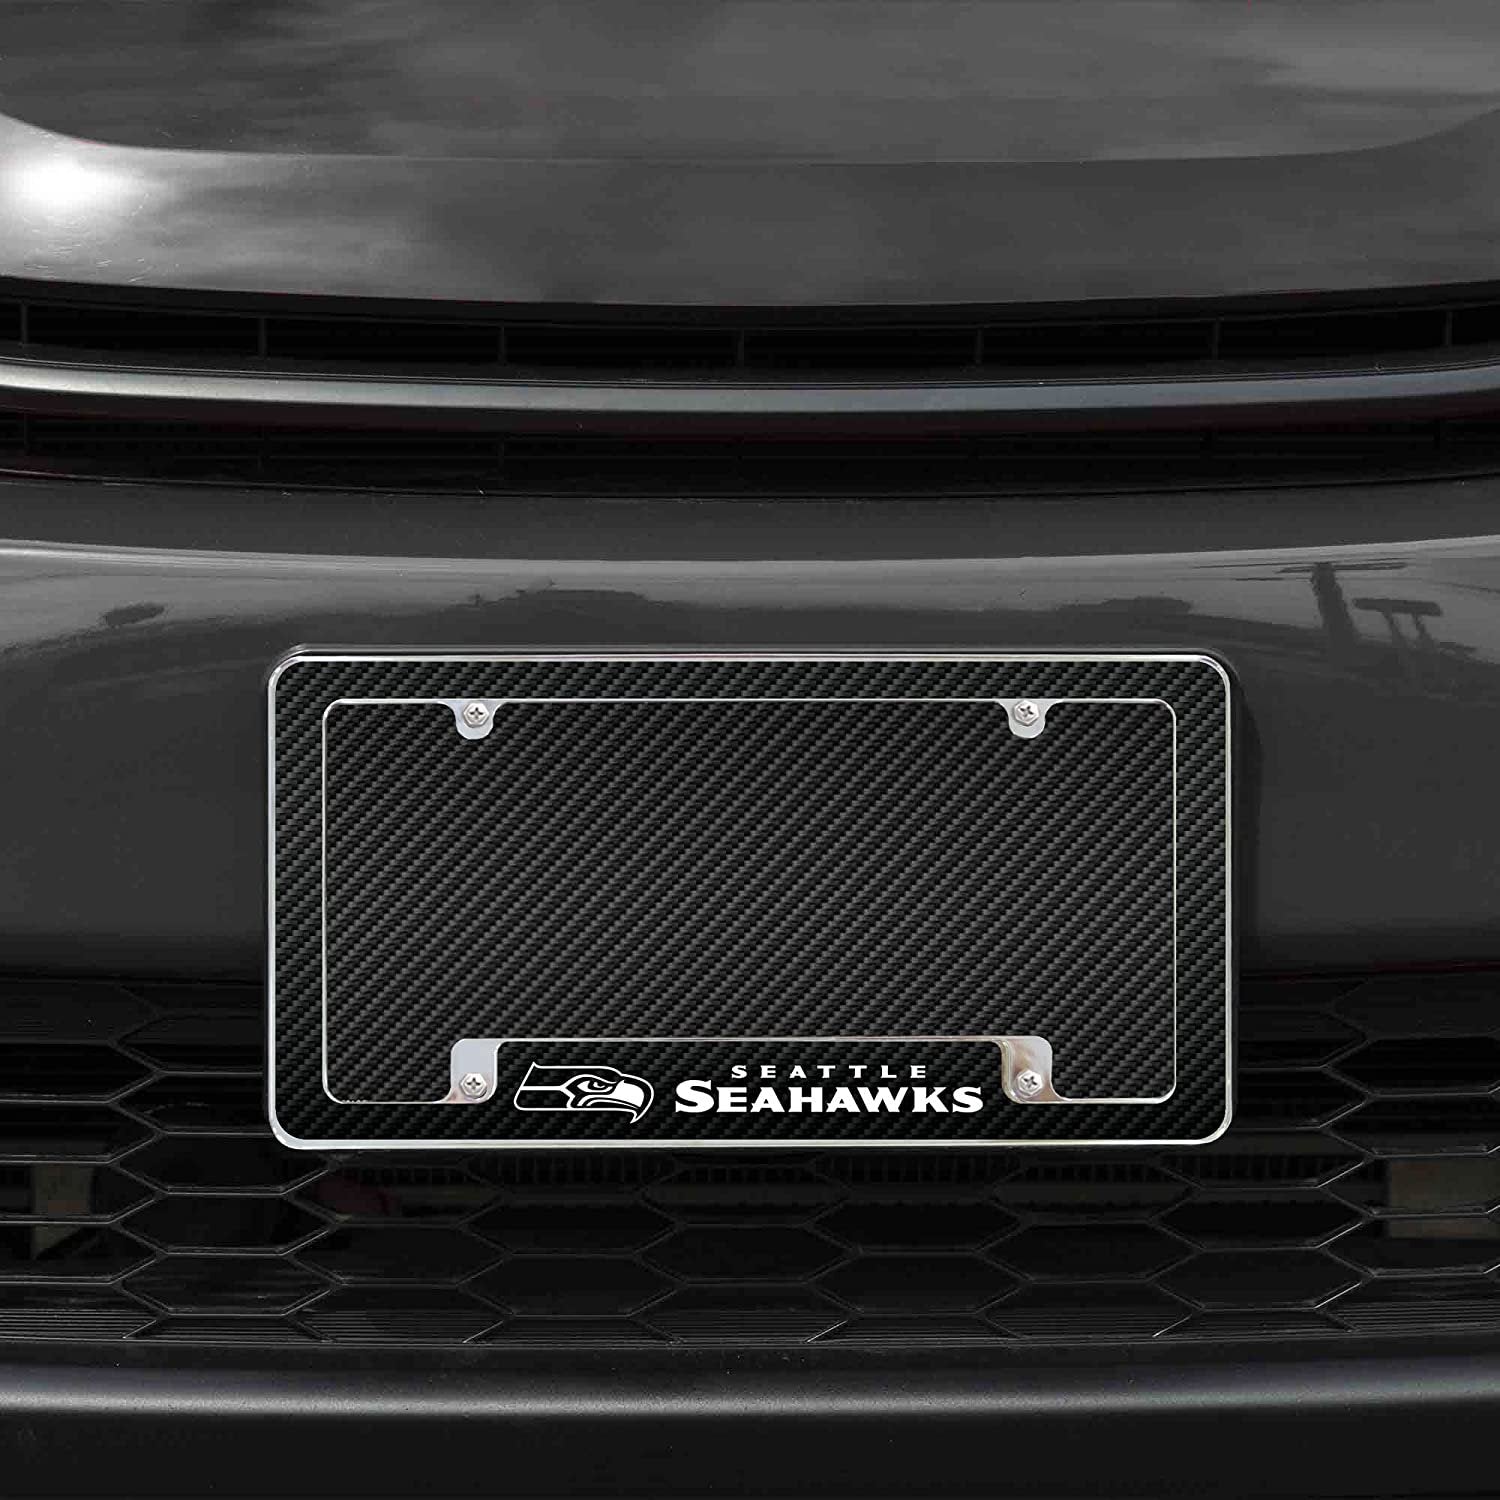 Seattle Seahawks Metal License Plate Frame Chrome Tag Cover Carbon Fiber Design 6x12 Inch